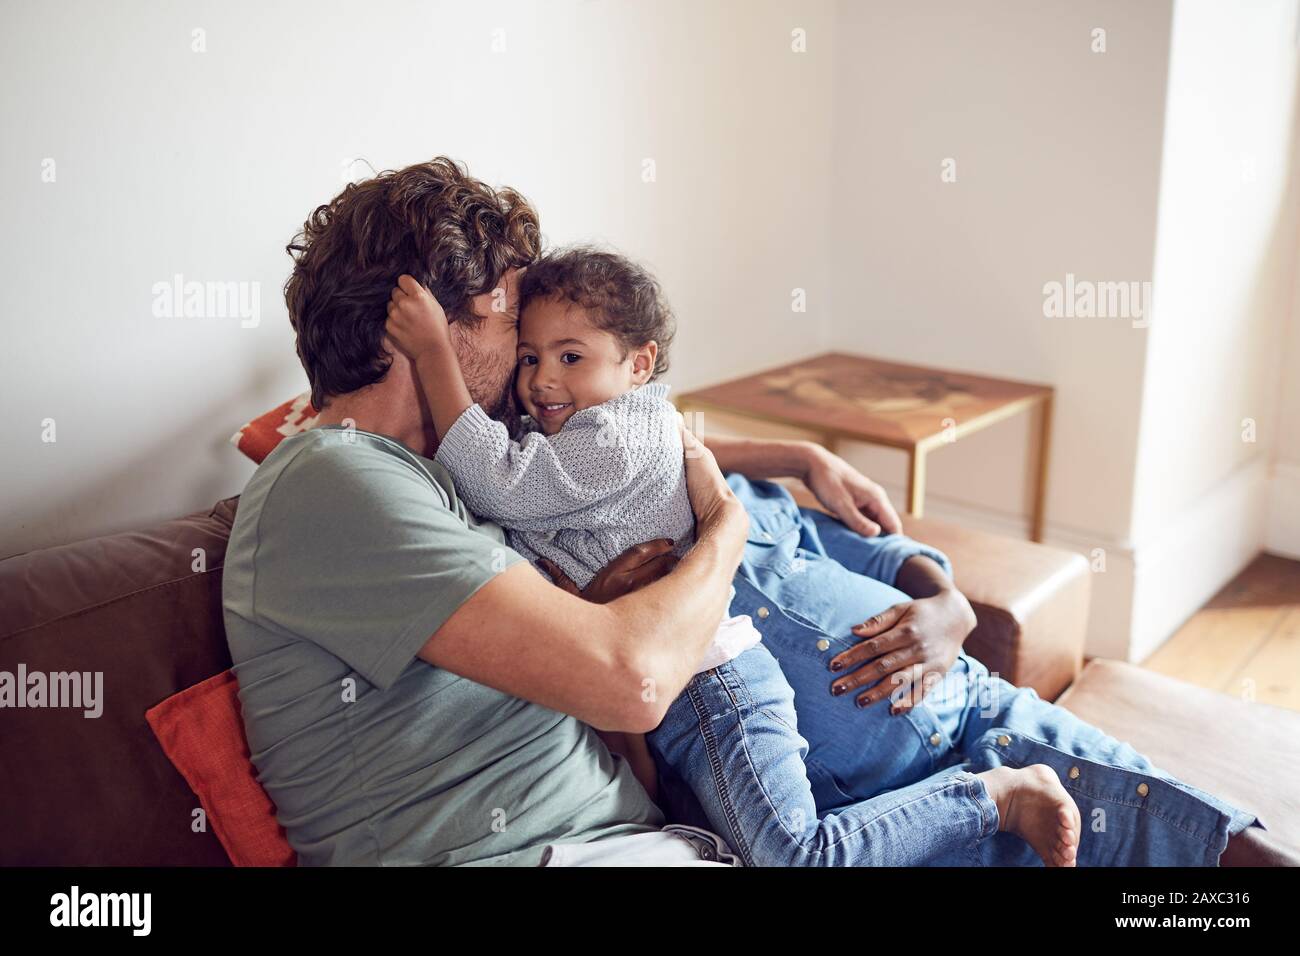 Affectionate young pregnant family cuddling on sofa Stock Photo